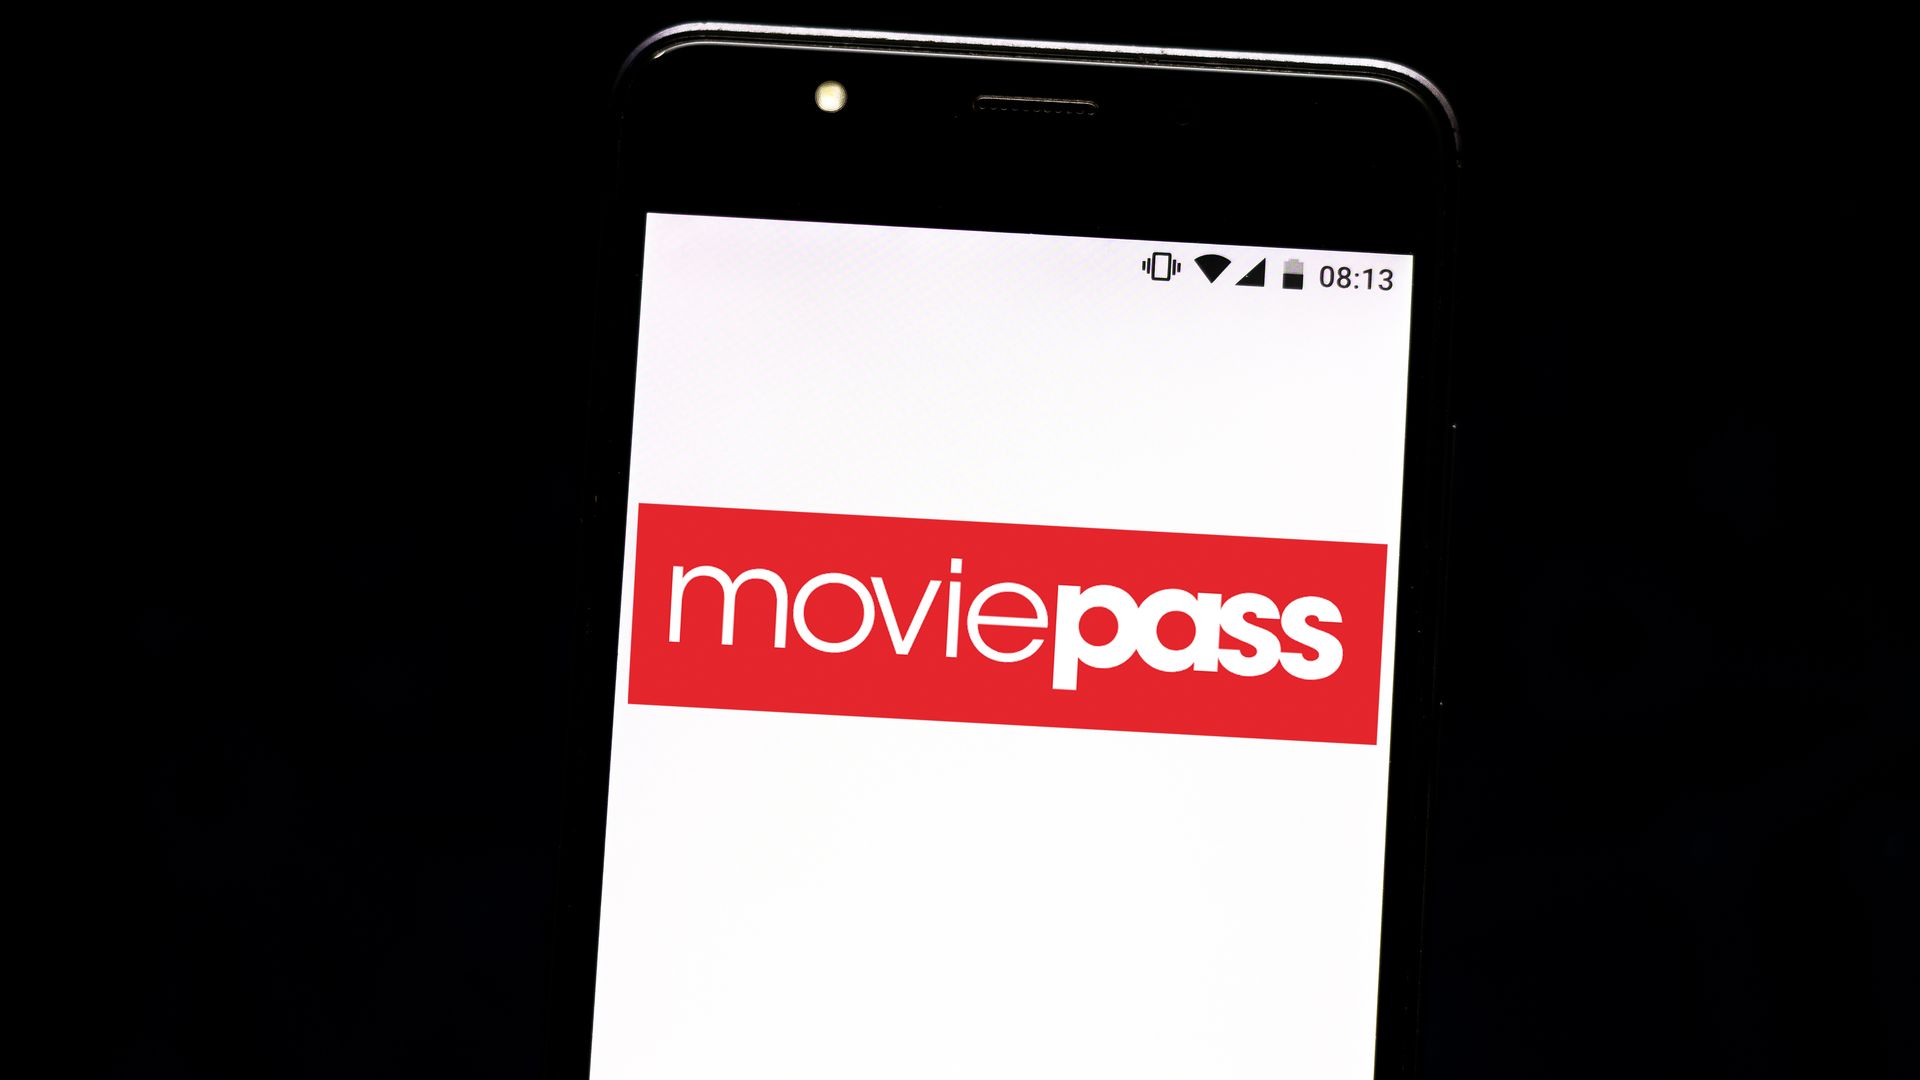 This image shows a phone with the Moviepass logo on it.